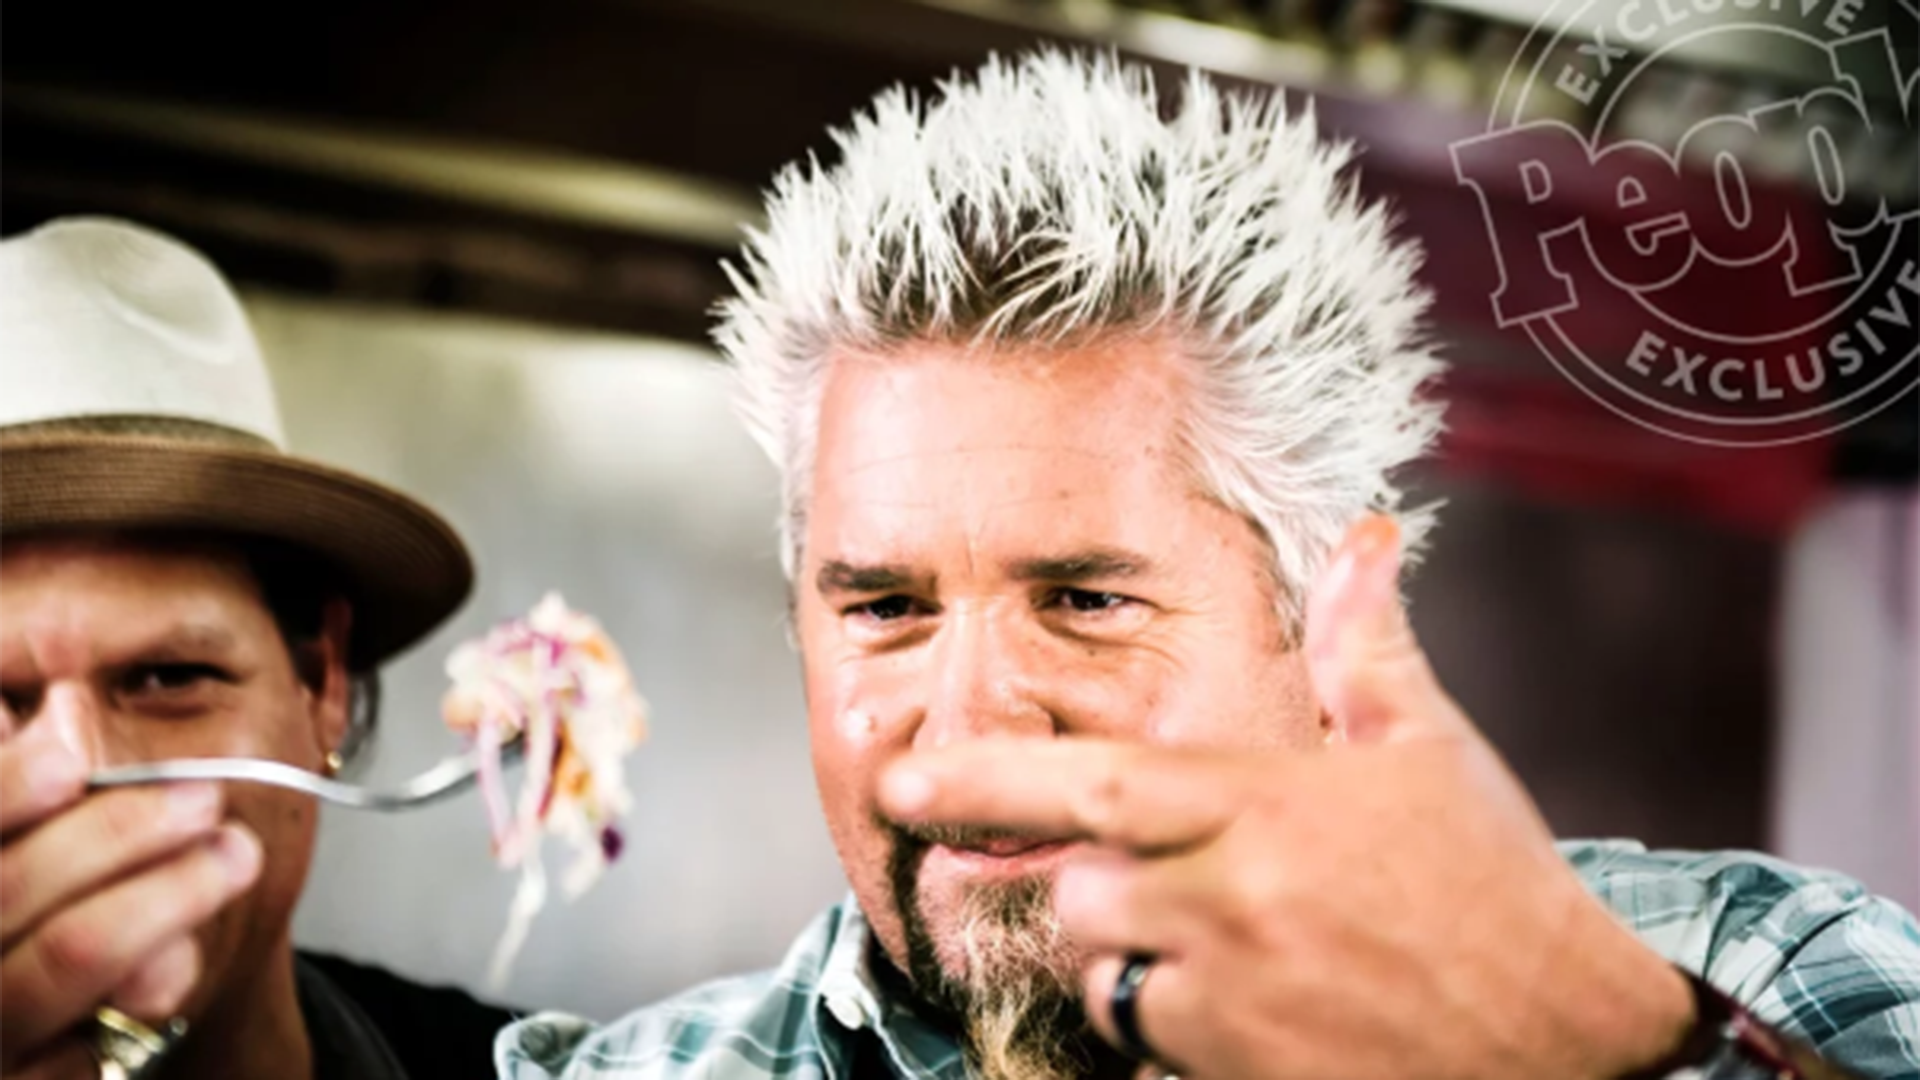 Guy Fieri, complete with signature haircut, prepares to taste a bite of pasta.